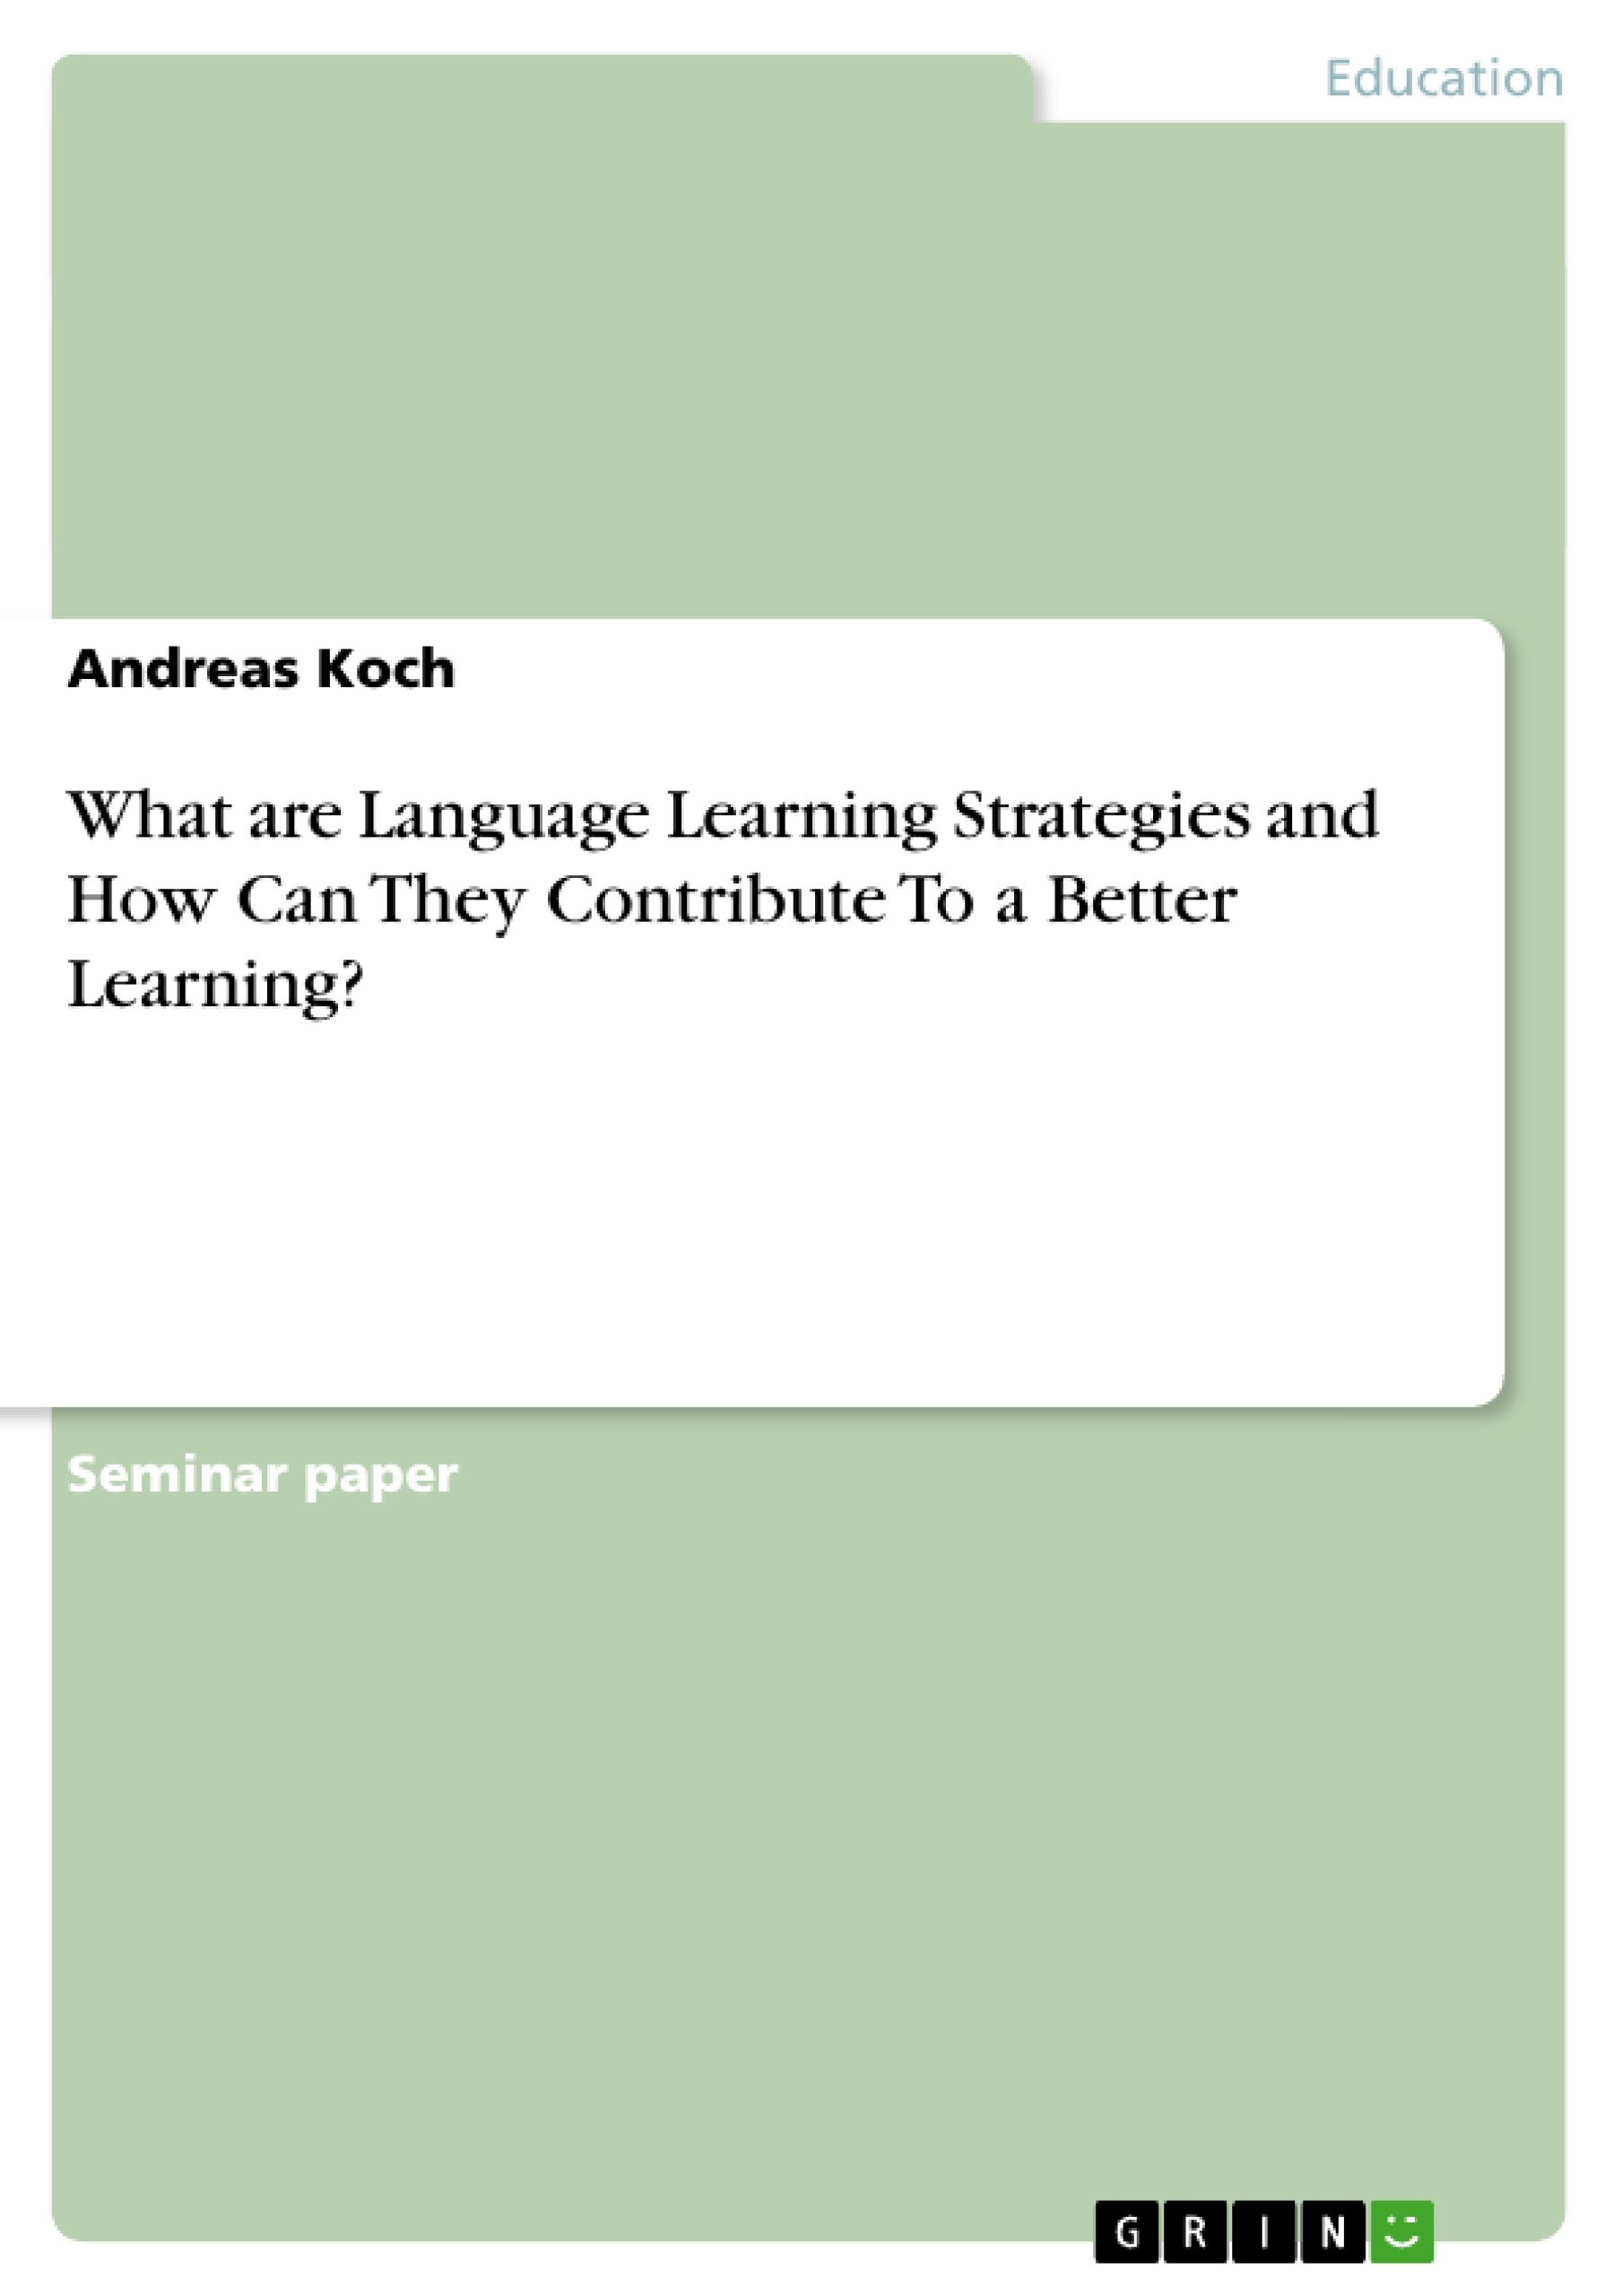 Title: What are Language Learning Strategies and How Can They Contribute To a Better Learning?